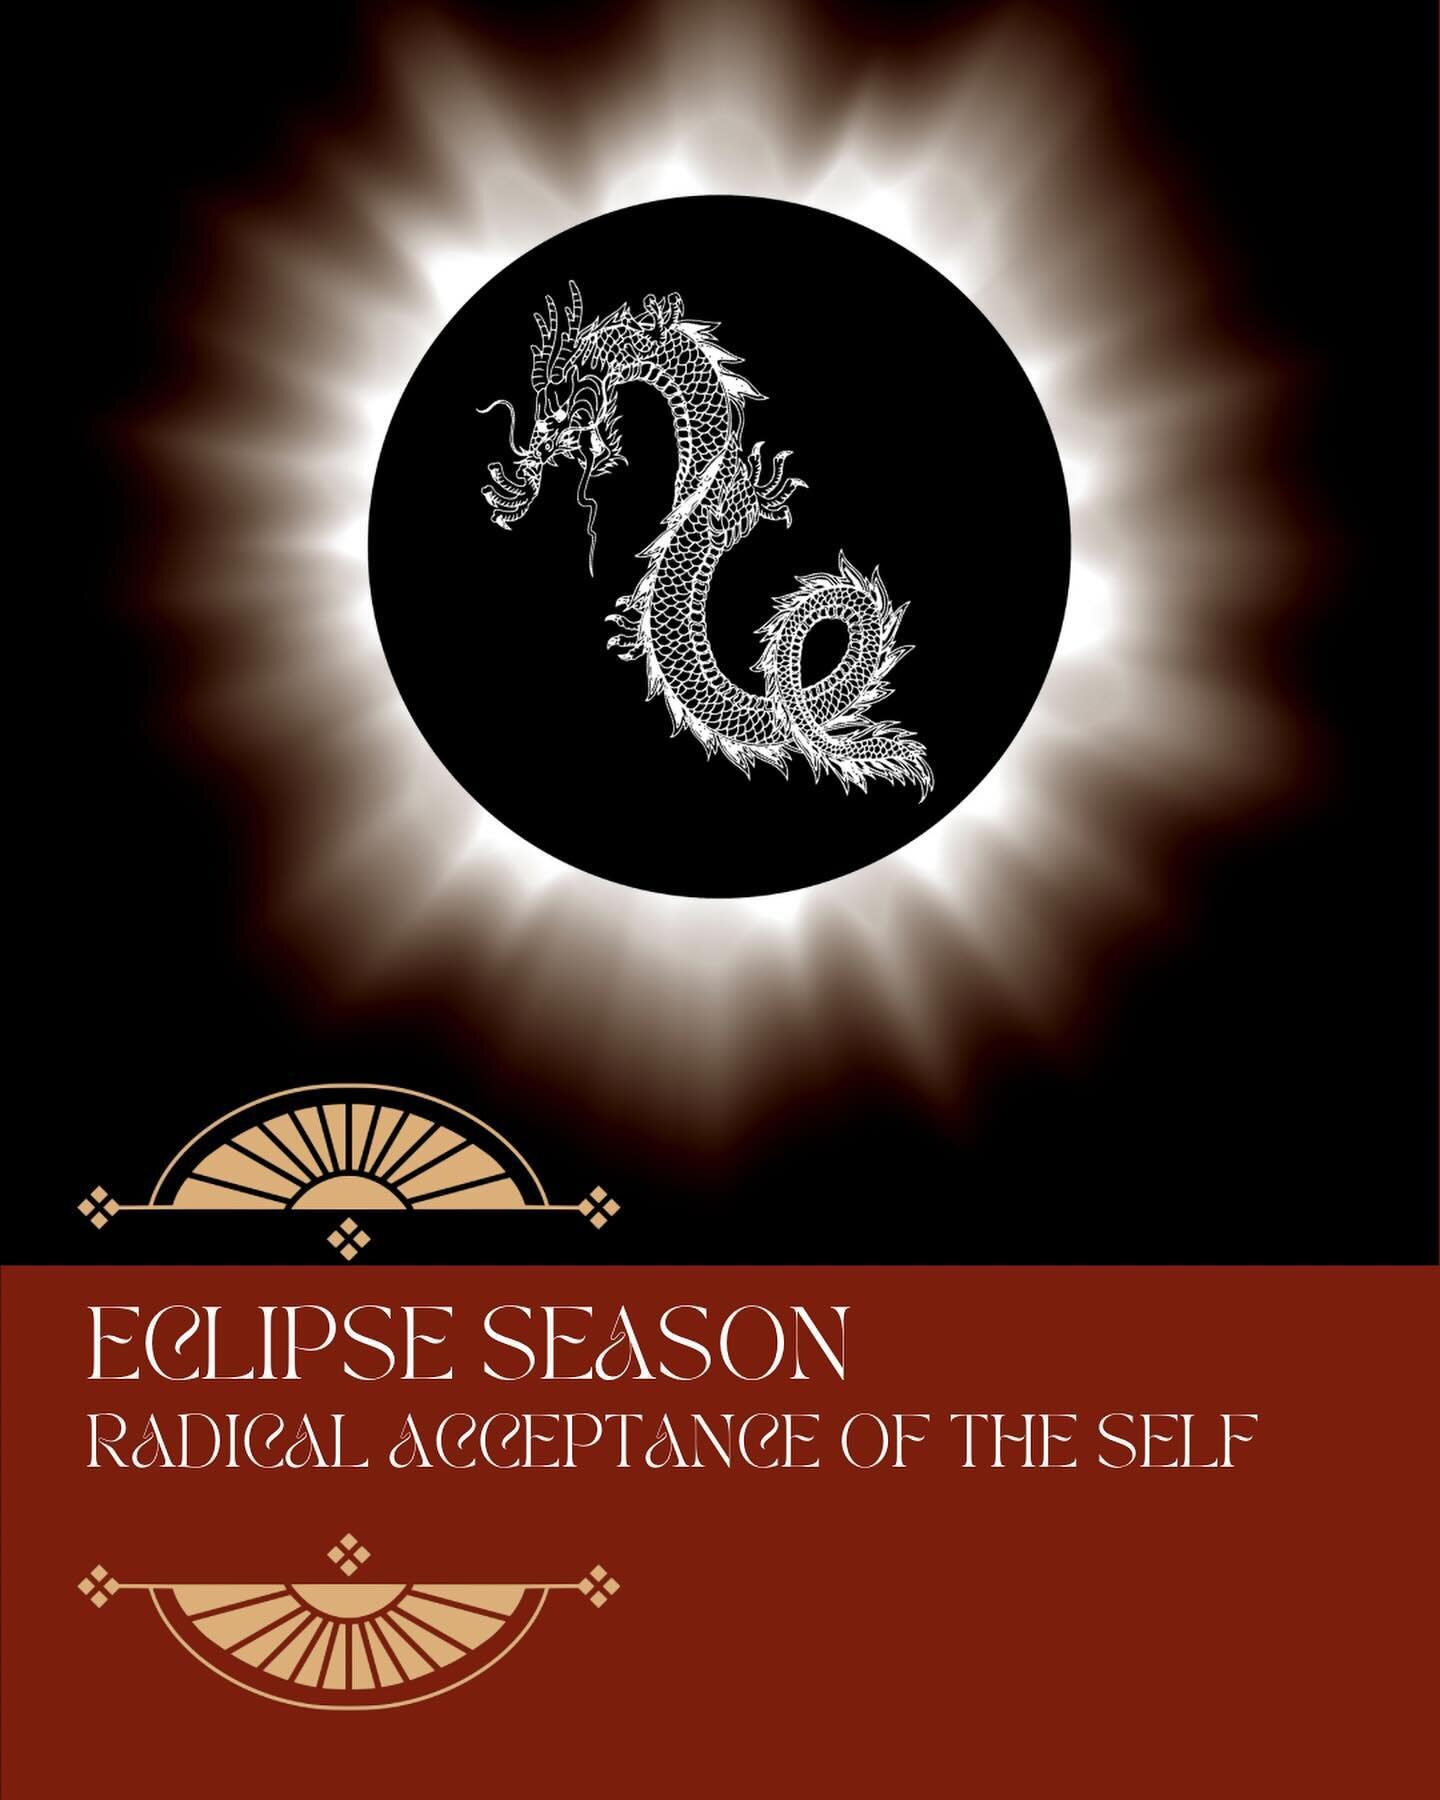 ⚡️Eclipse Season Horoscopes ⚡️
⚡️Radical Acceptance of the Self⚡️

✨Eclipses are the most incredible and life-changing events we experience as humans. They are legendary, sacred kisses between the luminaries that accelerate our lives. Anything happen